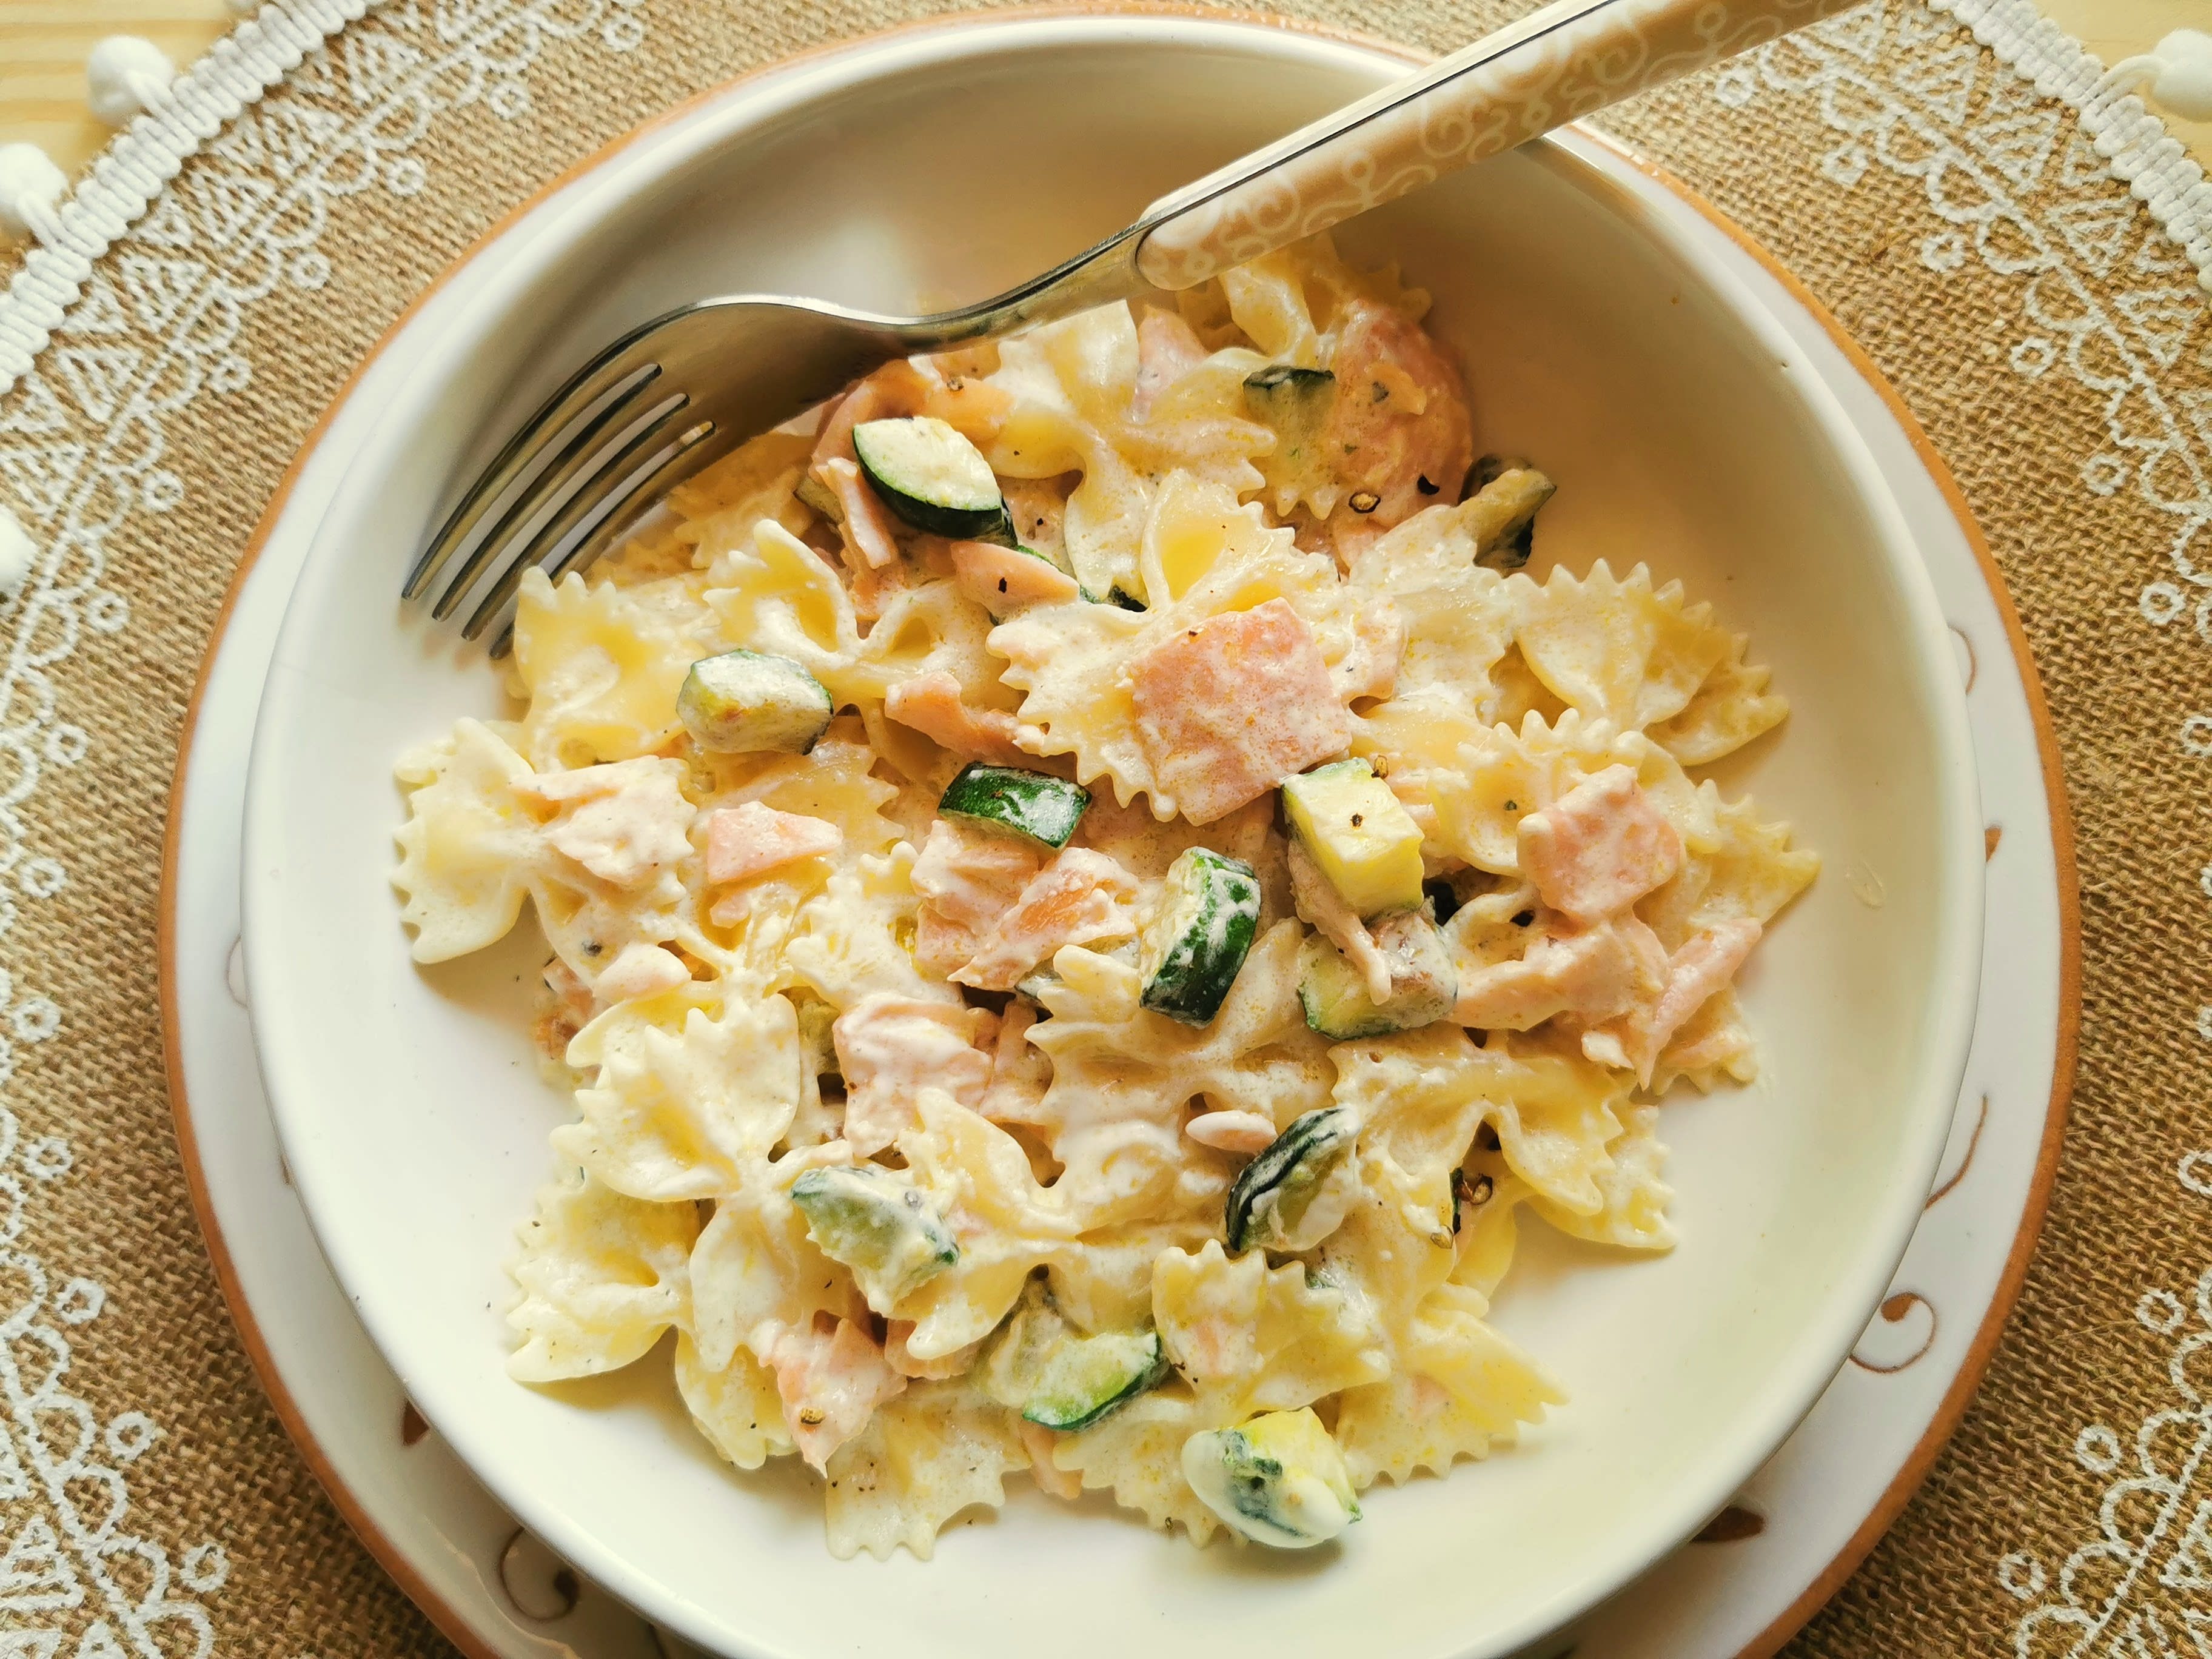 Farfalle pasta with smoked salmon & zucchini – The Pasta Project